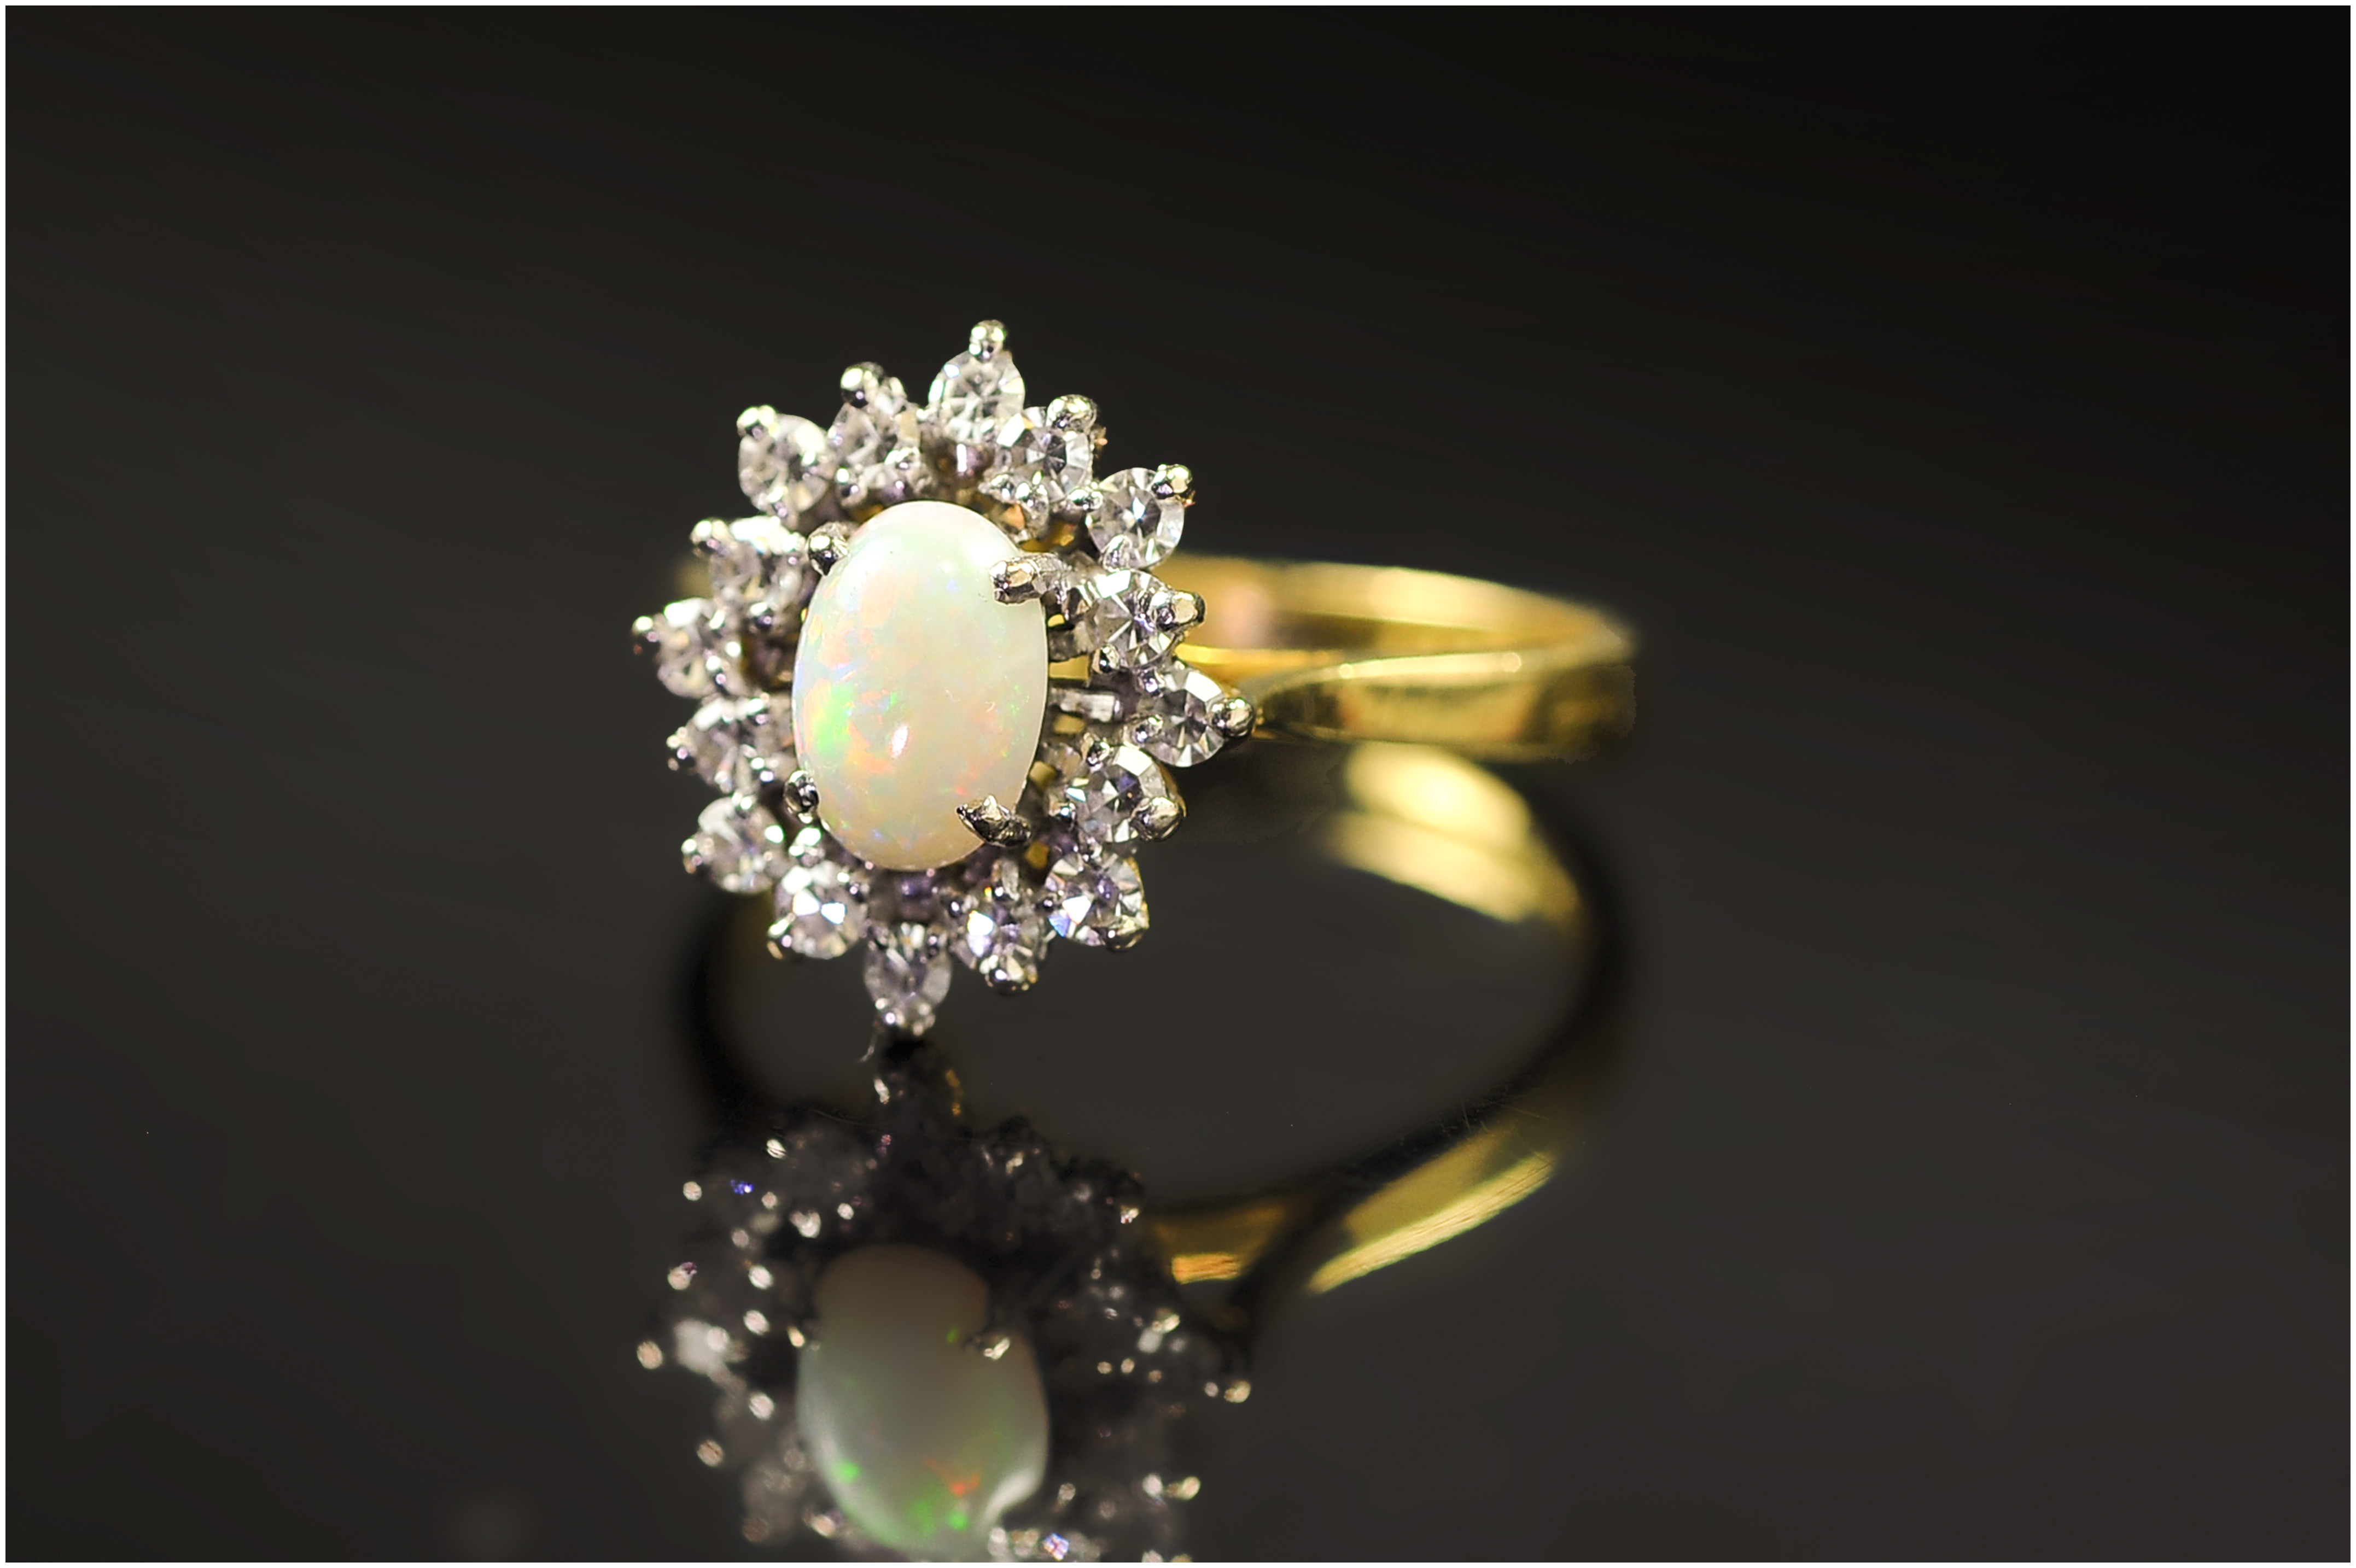 18ct Gold Diamond Dress Ring, Set With A Central Opal Surrounded By Round Cut Diamonds, Fully - Image 2 of 5